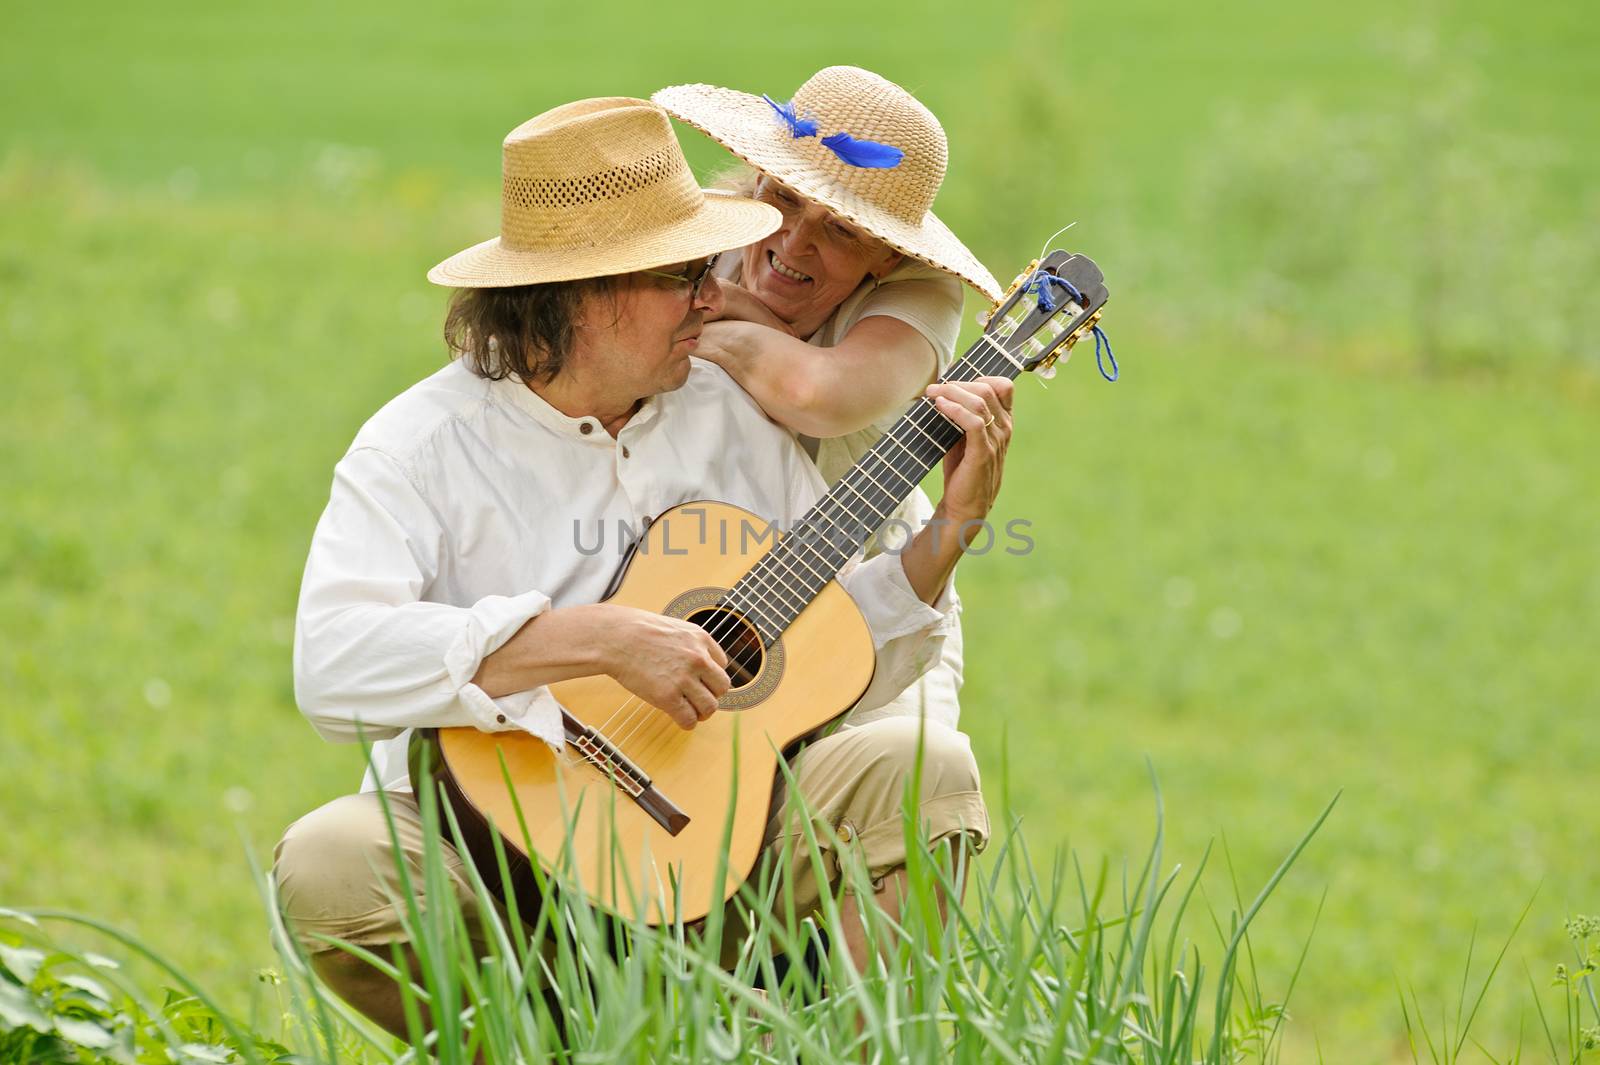 Senior couple having fun together. The man is sitting and playing a guitar. The woman hugs him from behind. They are outdoors.